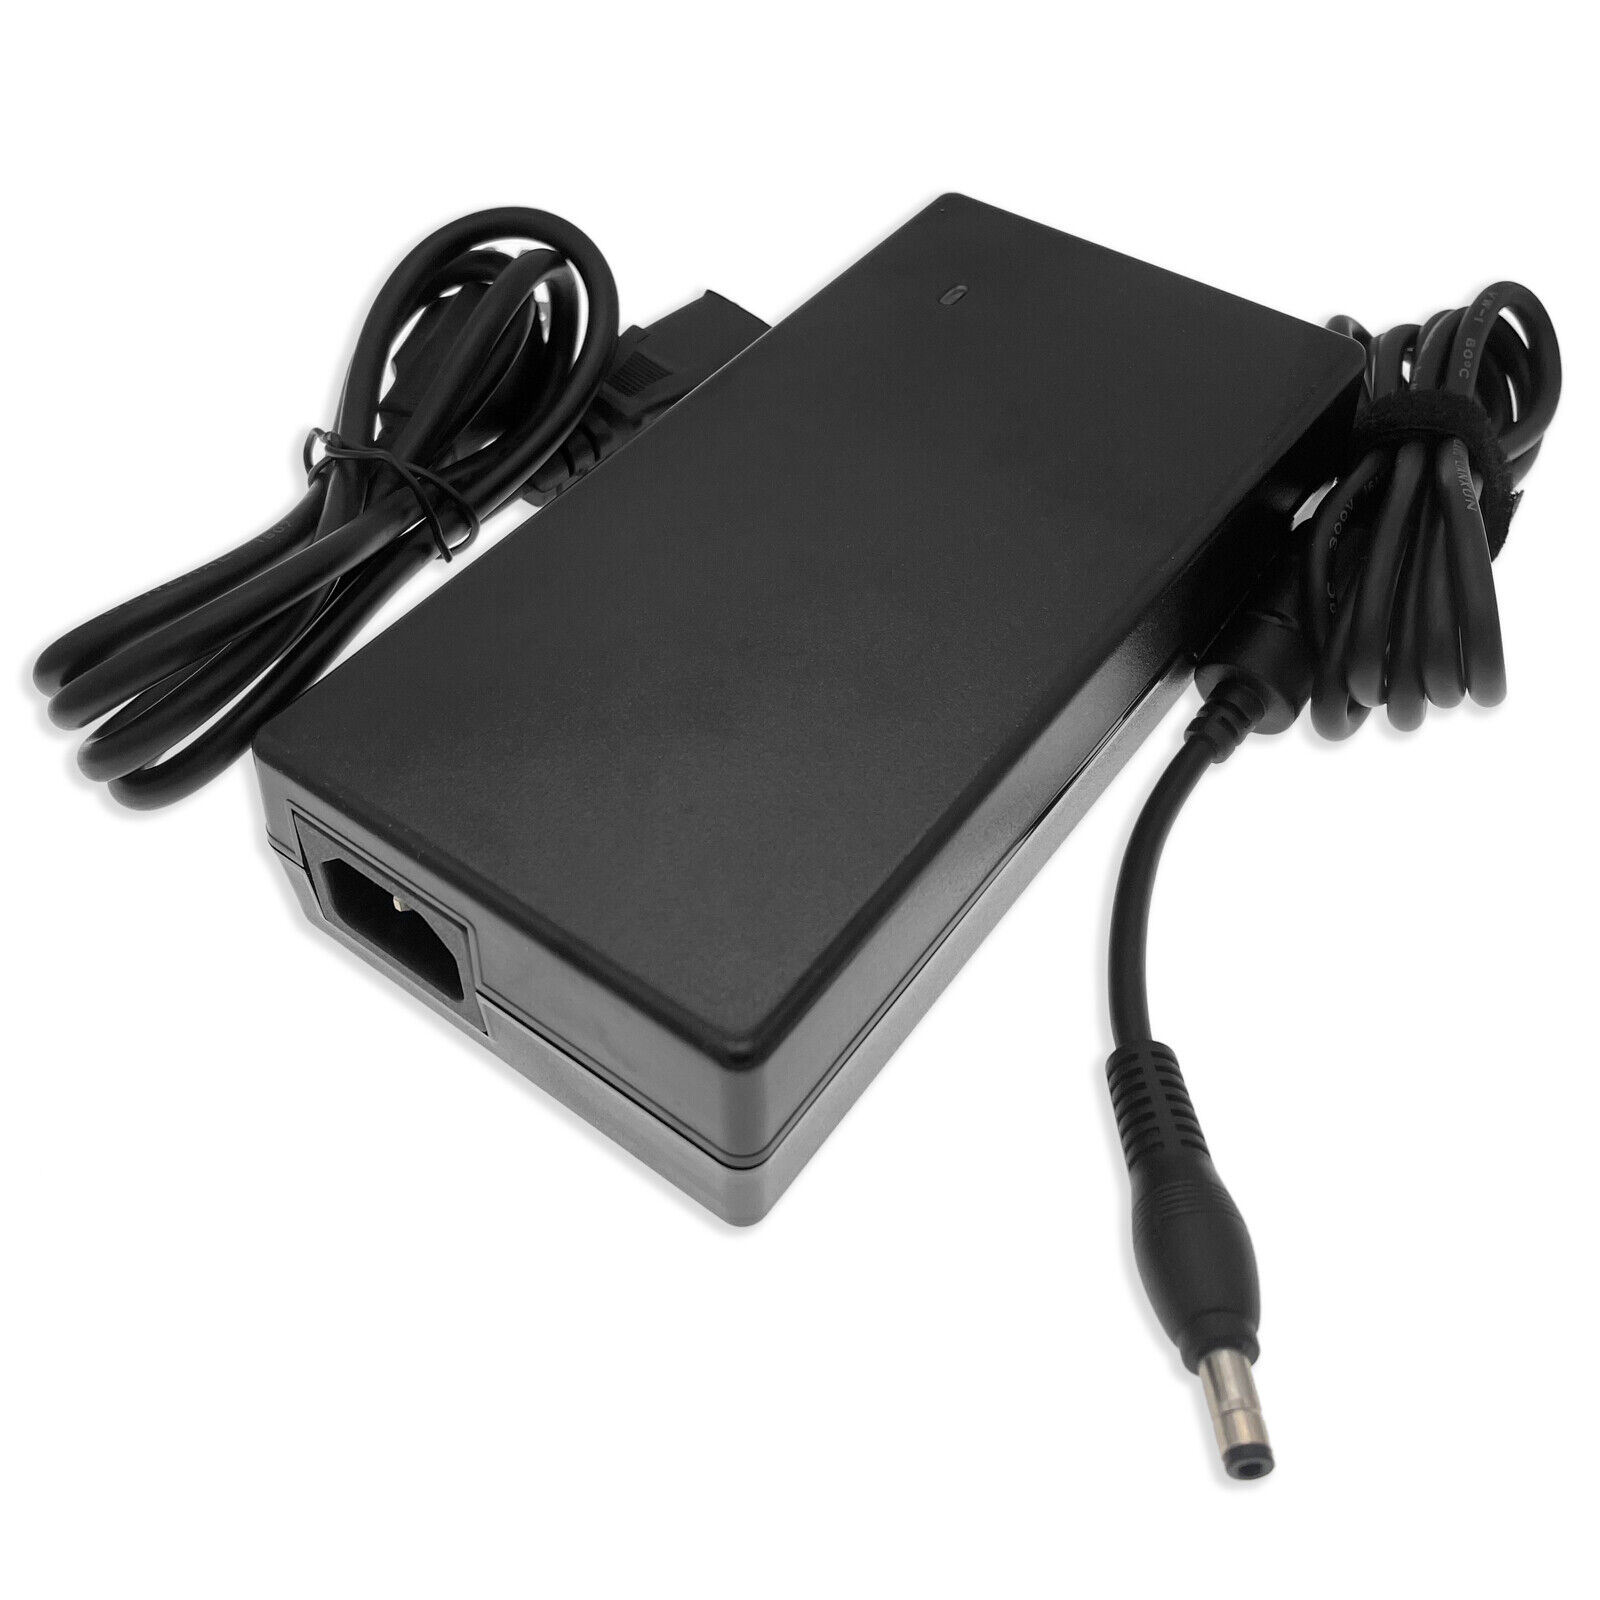 180W 19V 9.5A AC Power Adapter Charger for MSI GT683 GX60 Notebook Supply Cord